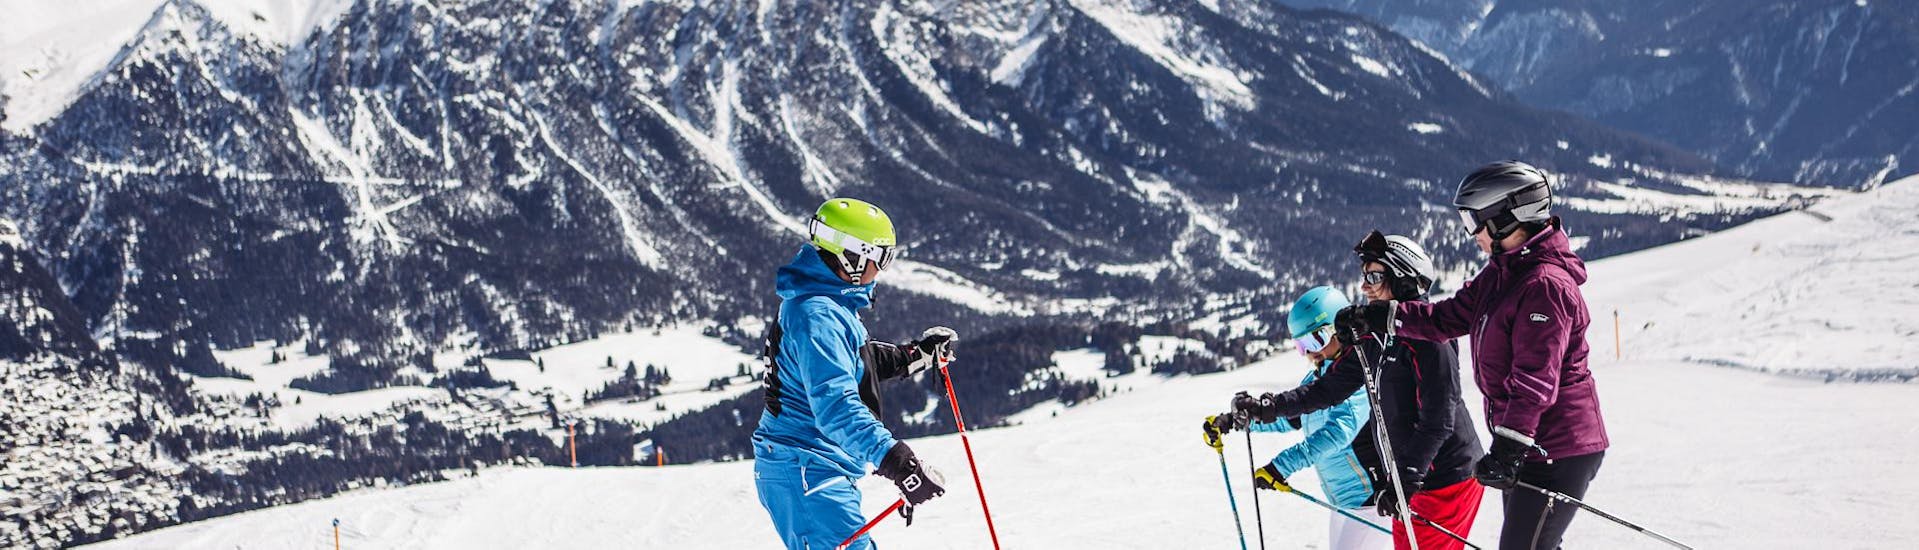 Private Ski Lessons for Groups of All Levels.